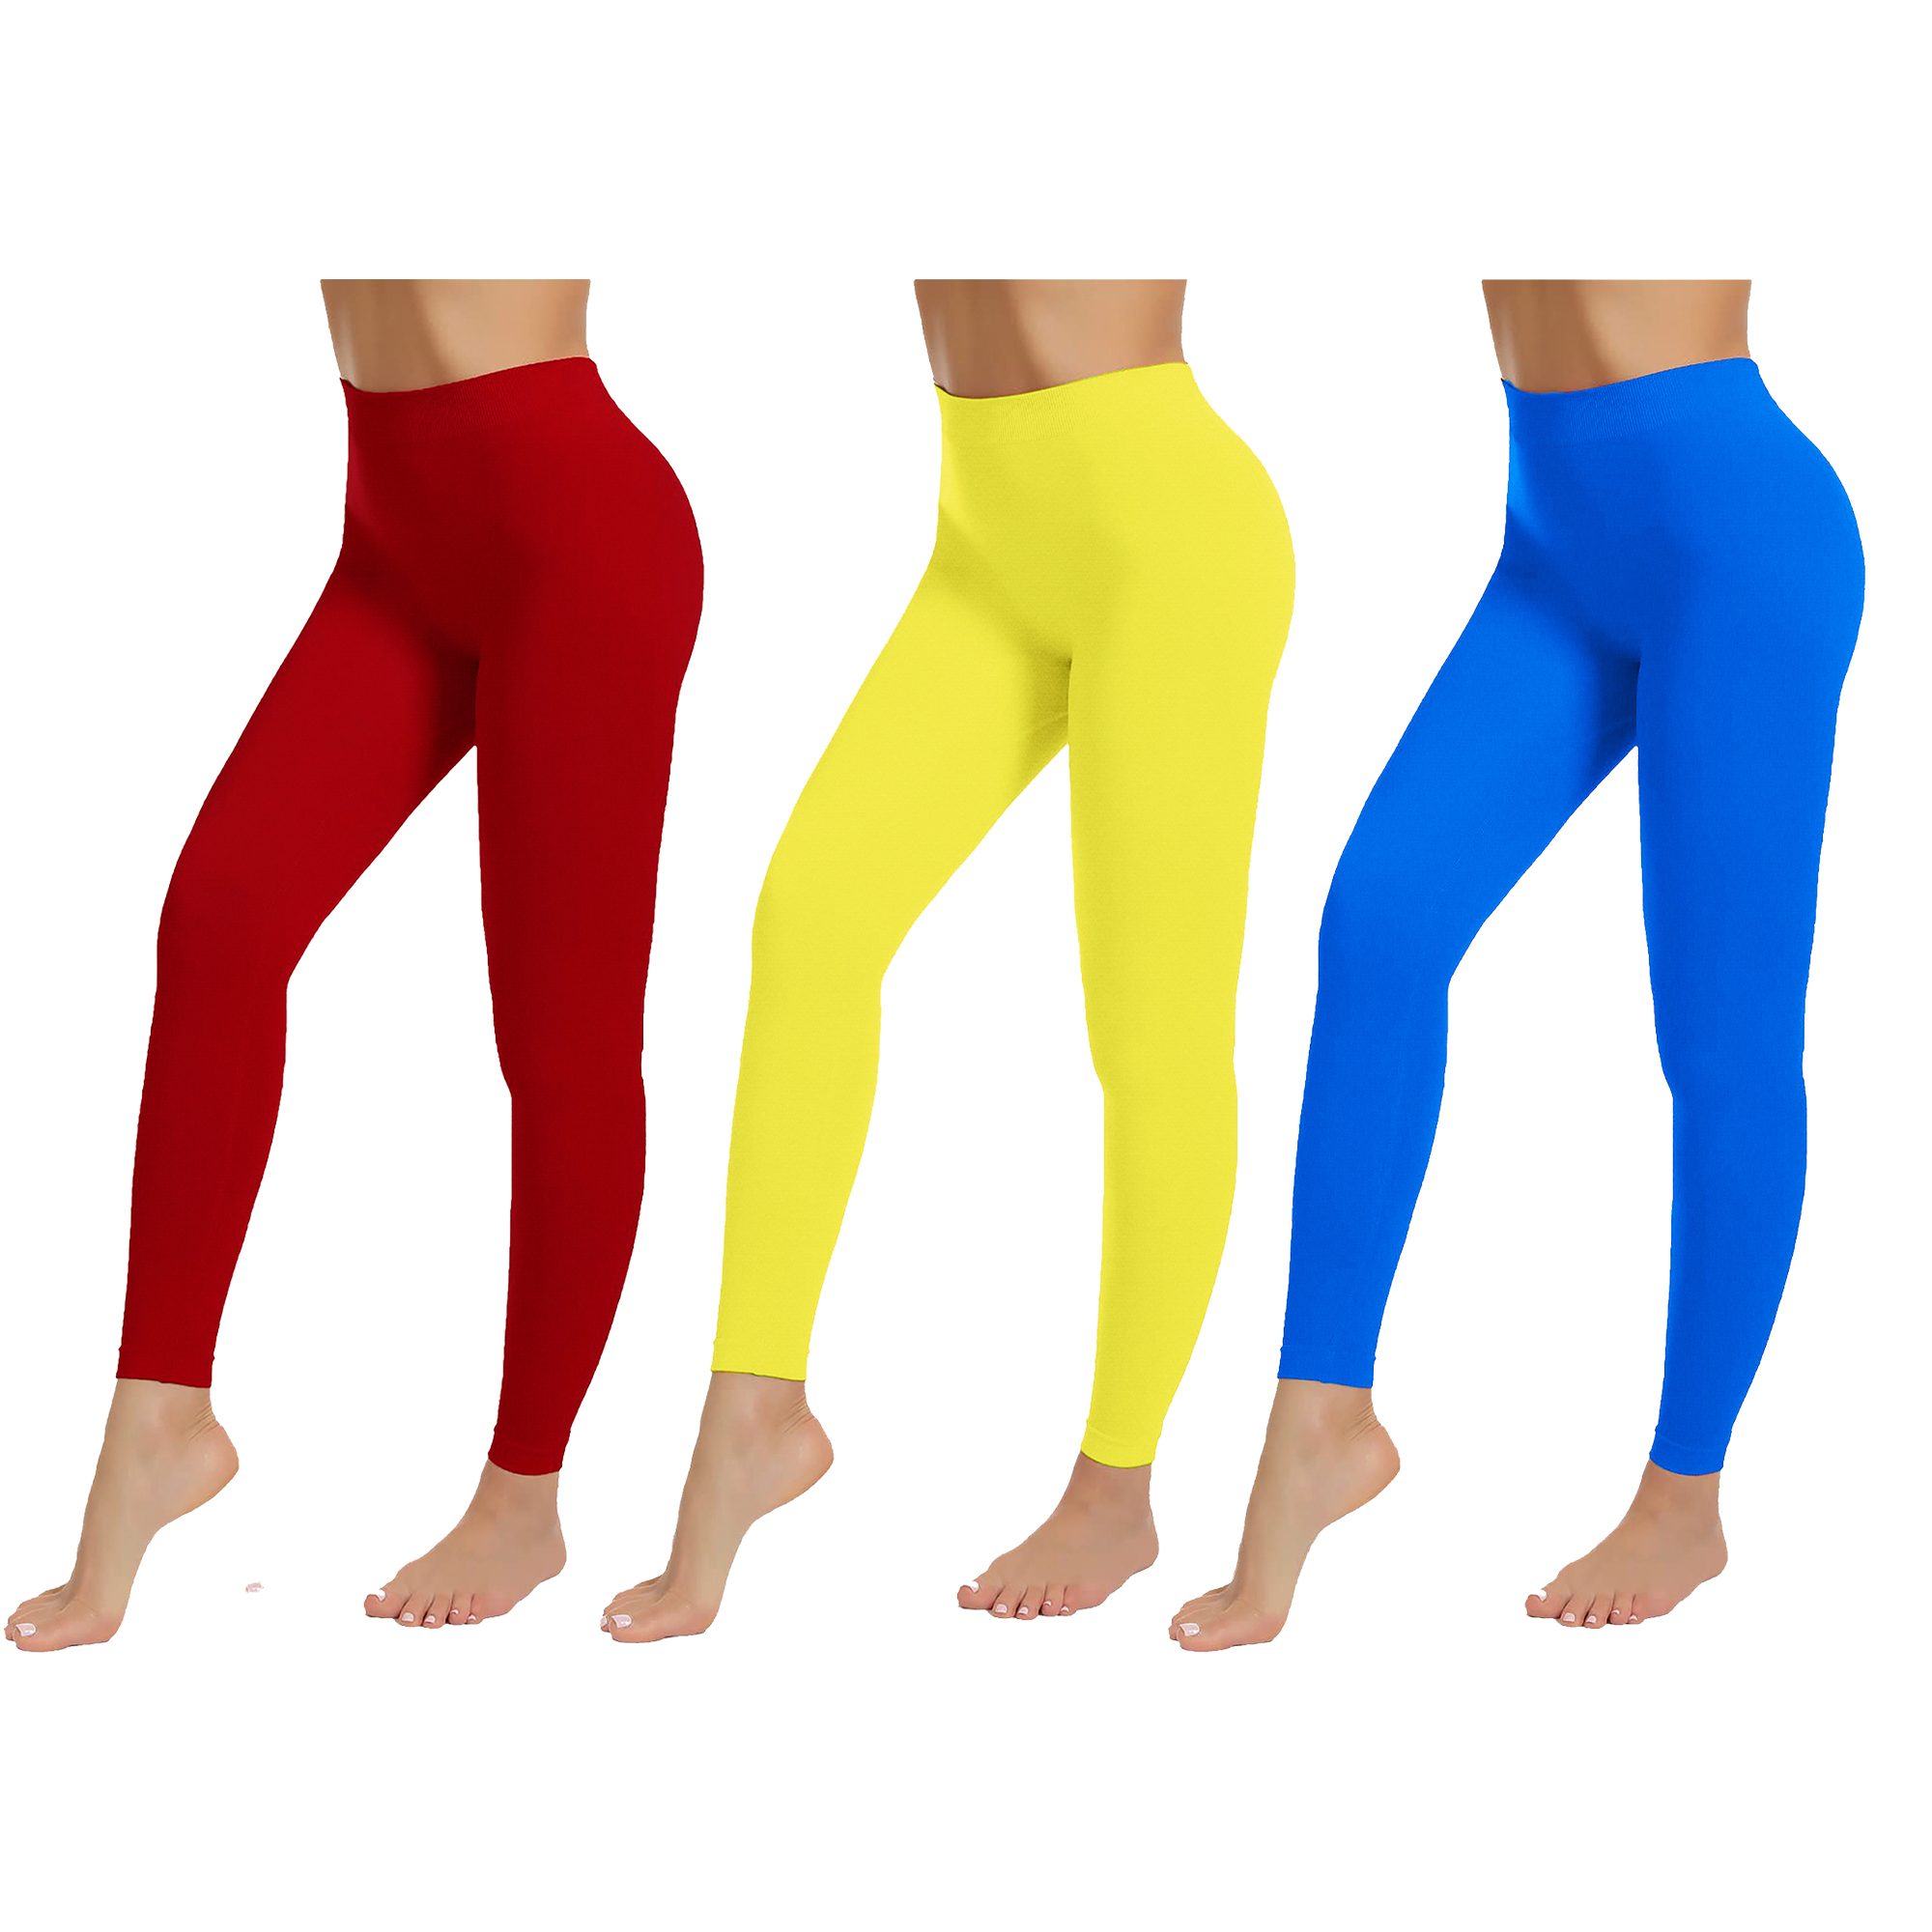 3-Pack: Women's High-Waist Ultra-Soft Stretchy Solid Fitness Yoga Leggings Pants - RED, XL